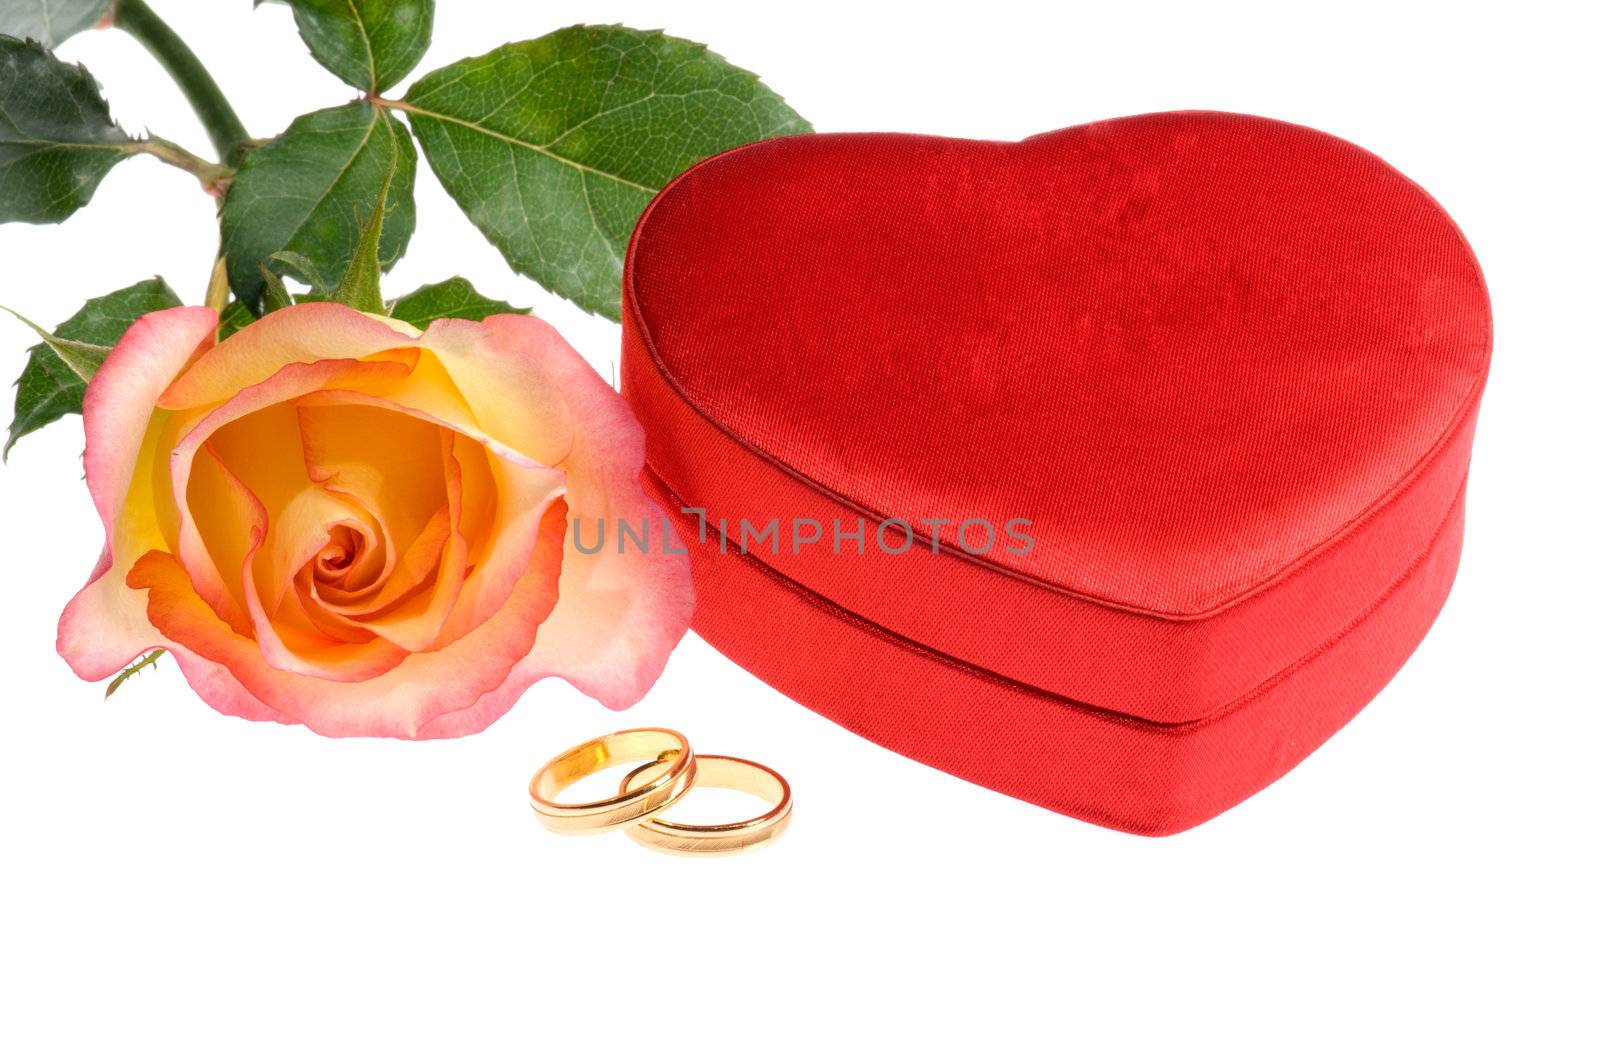 red yellow rose wedding rings and heart shape box over white